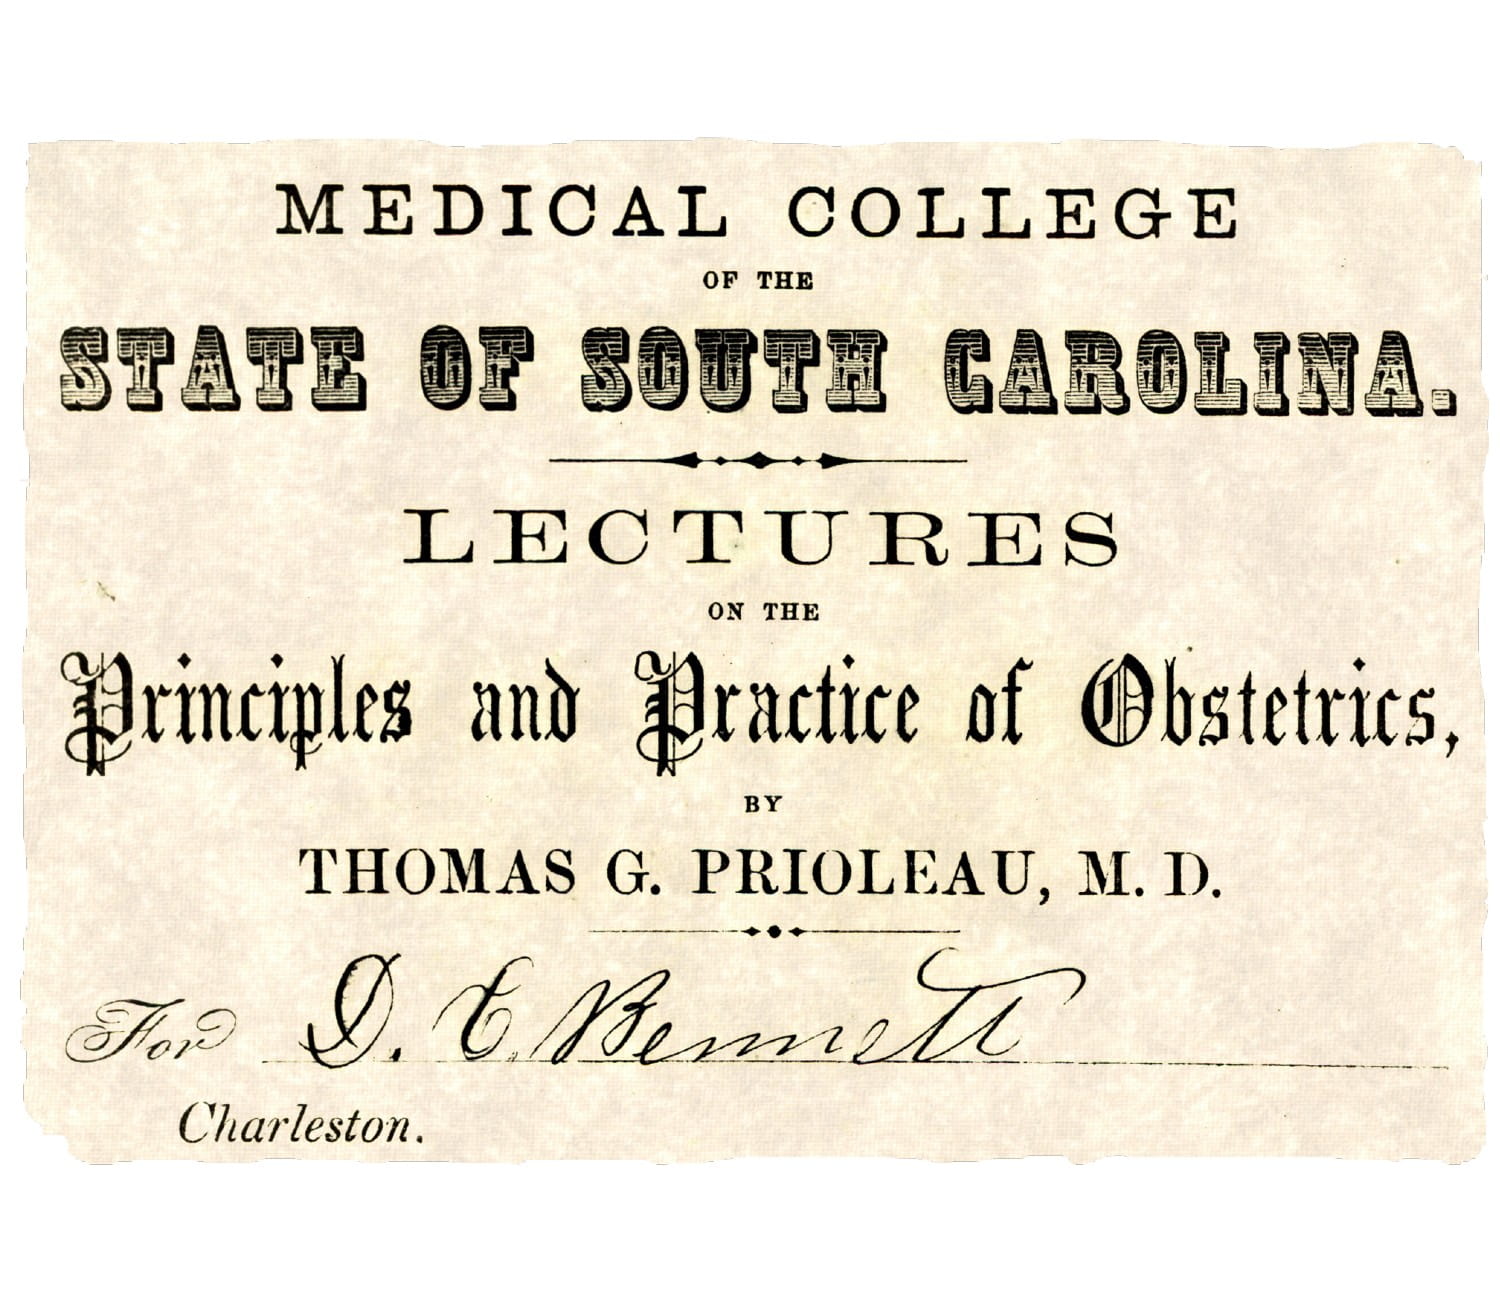 Text that reads: Medical College of the State of South Carolina Lectures on the Principles and Practice of Obstetrics, by Thomas G. Prioleau, M.D. A signature of the lecture attendee is at the bottom 